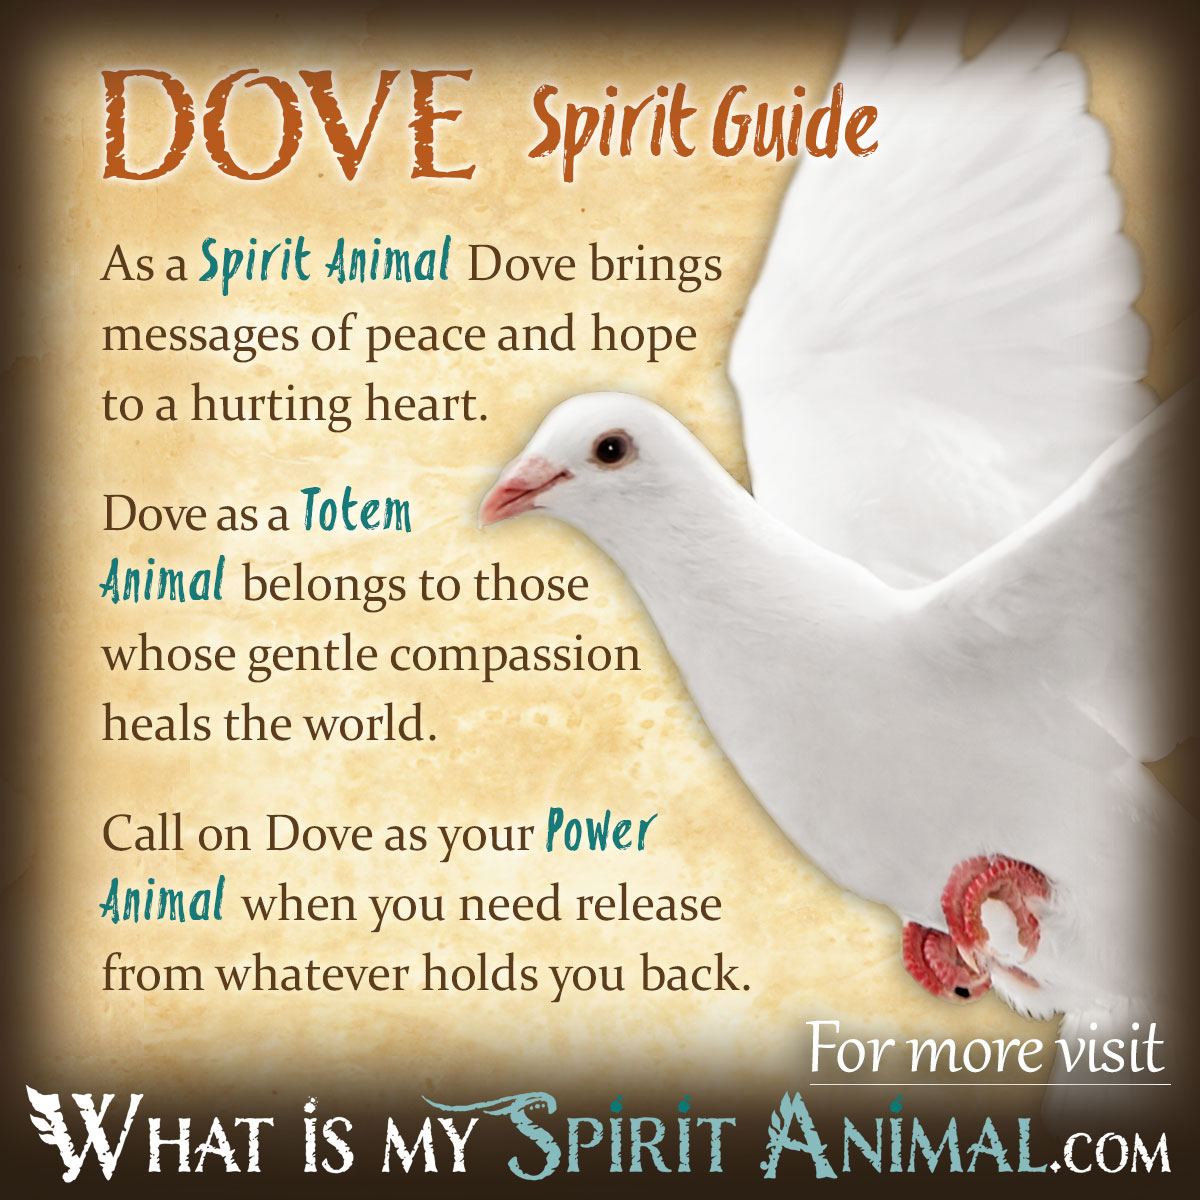 What does it mean to be born with Dove as a totem animal?